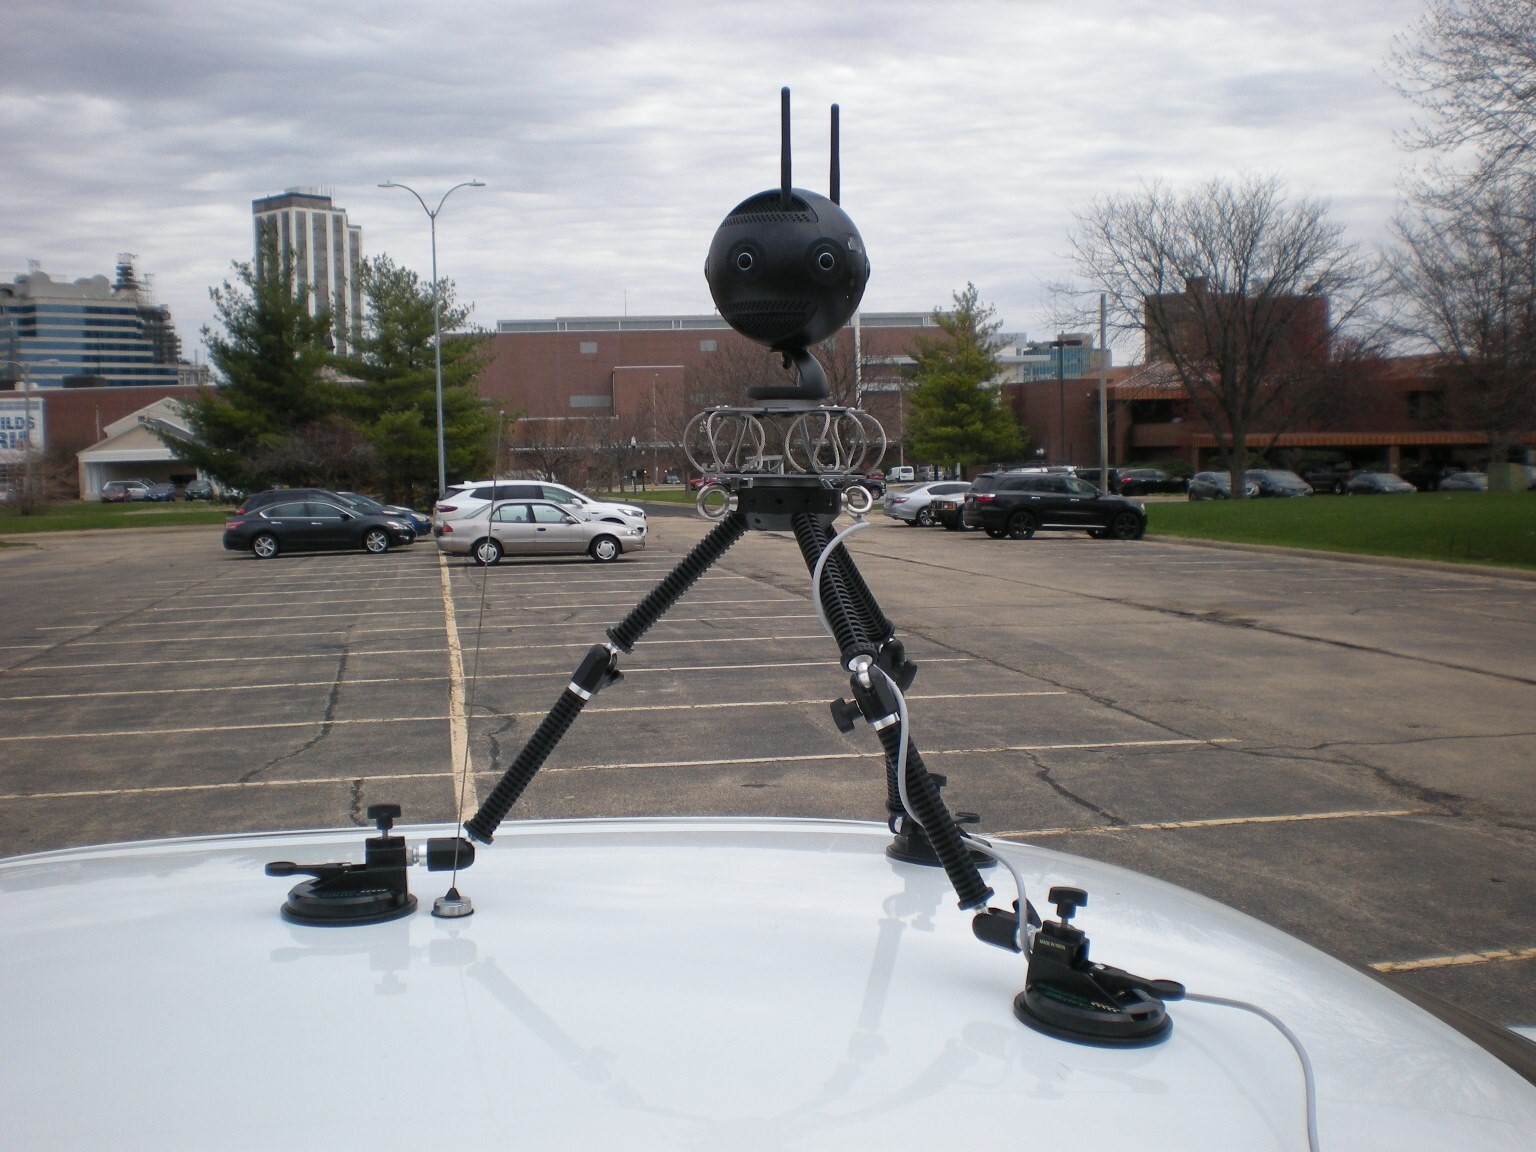 Camera on top of car.